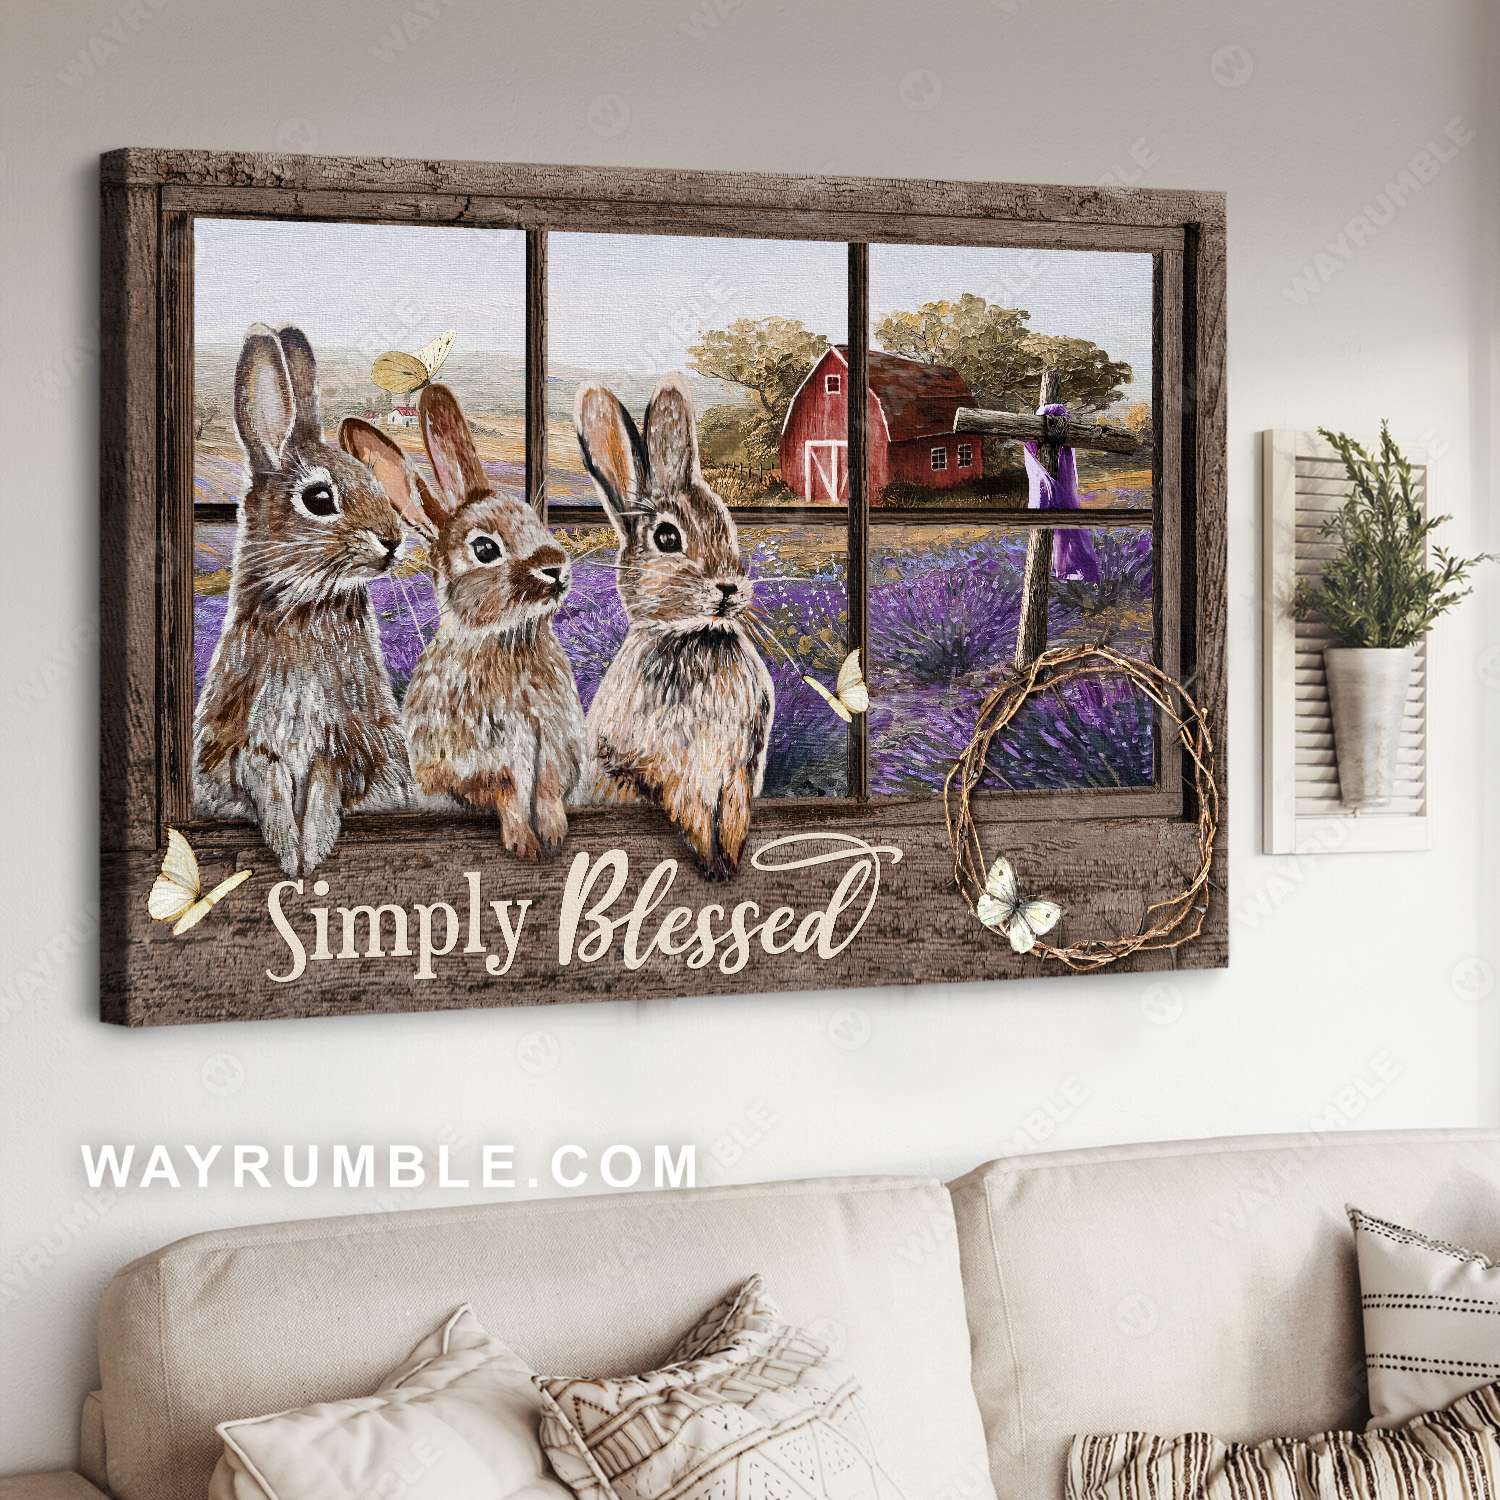 Rabbits drawing, Old barn, Cross, Lavender, Simply blessed - Jesus Landscape Canvas Prints, Christian Wall Art